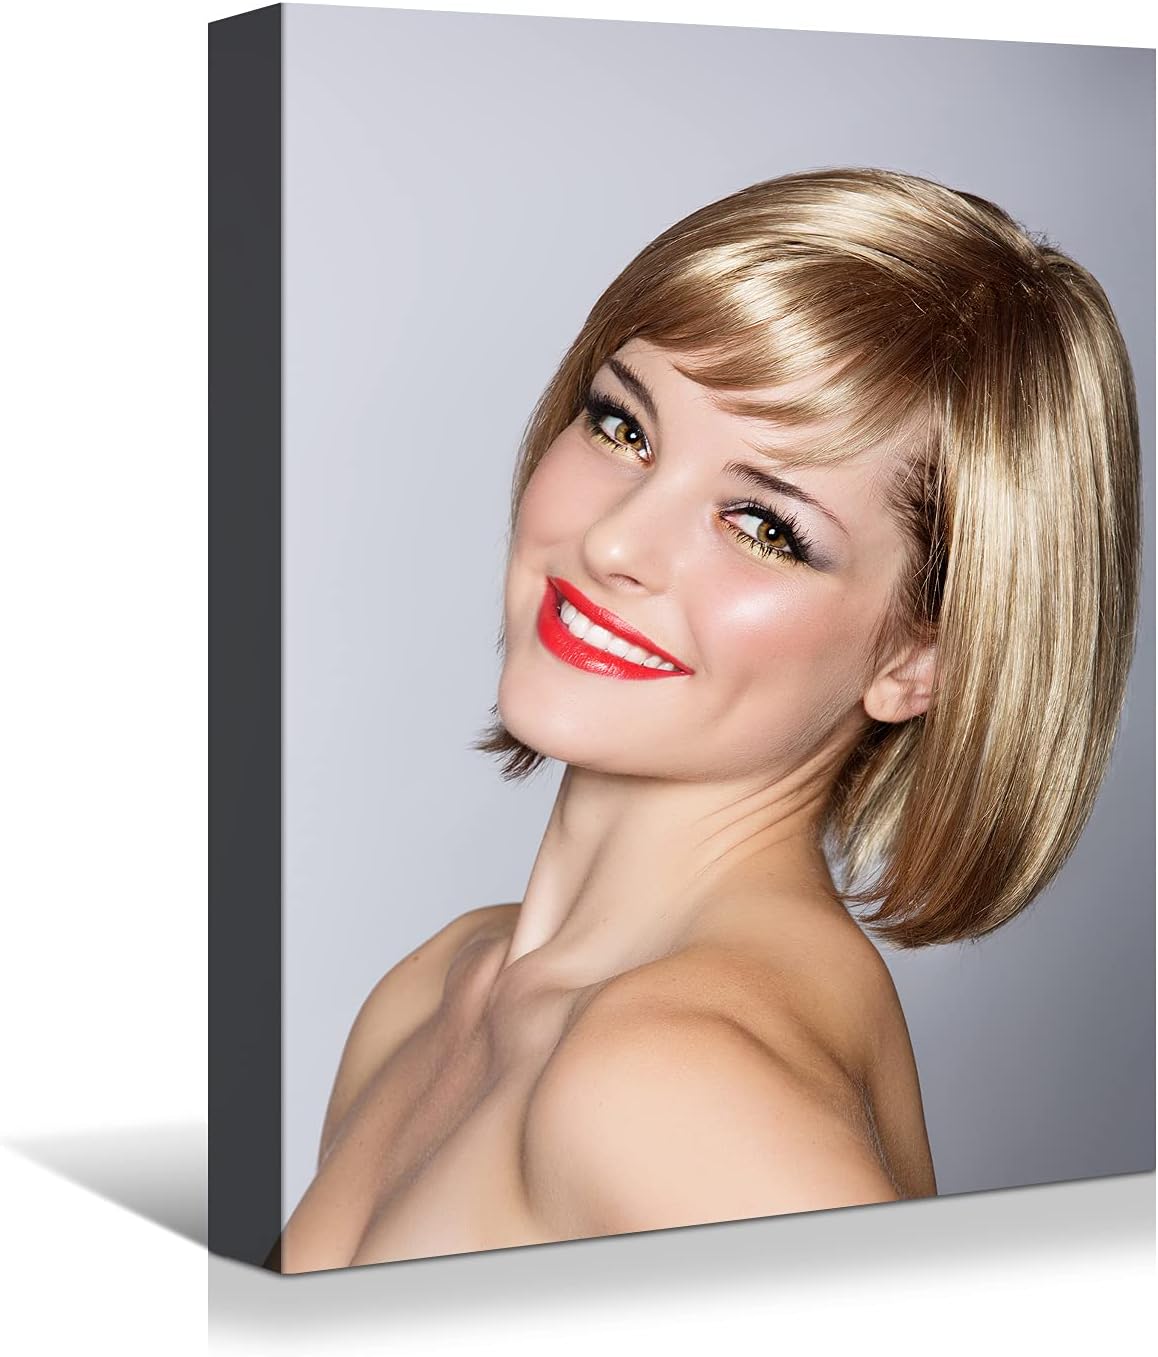 Brusheslife Hair Salon Art: Canvas Portrait of a Beauty with Fashion Hair Style